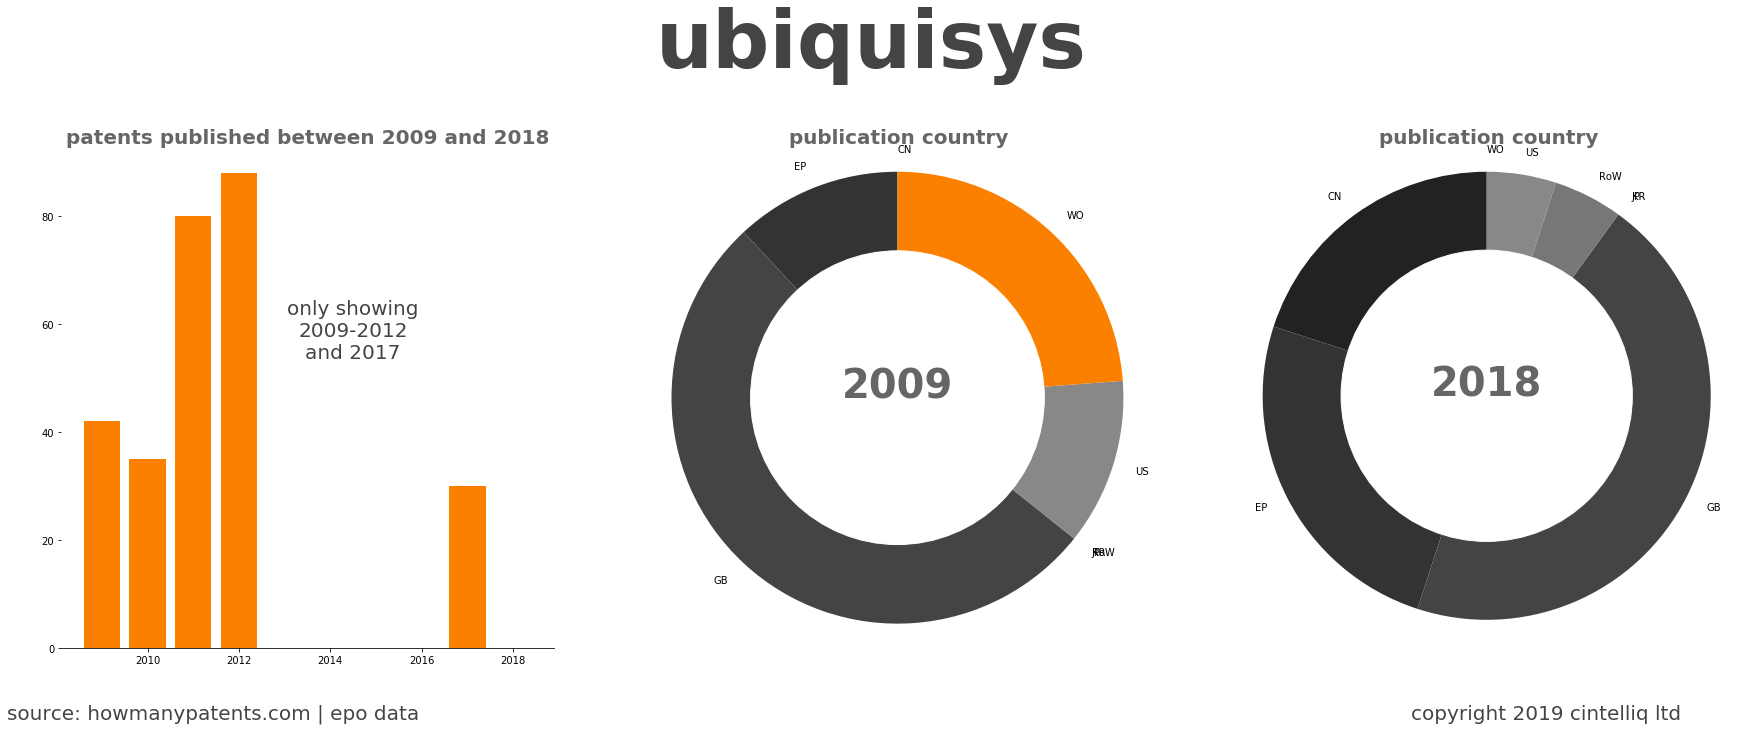 summary of patents for Ubiquisys